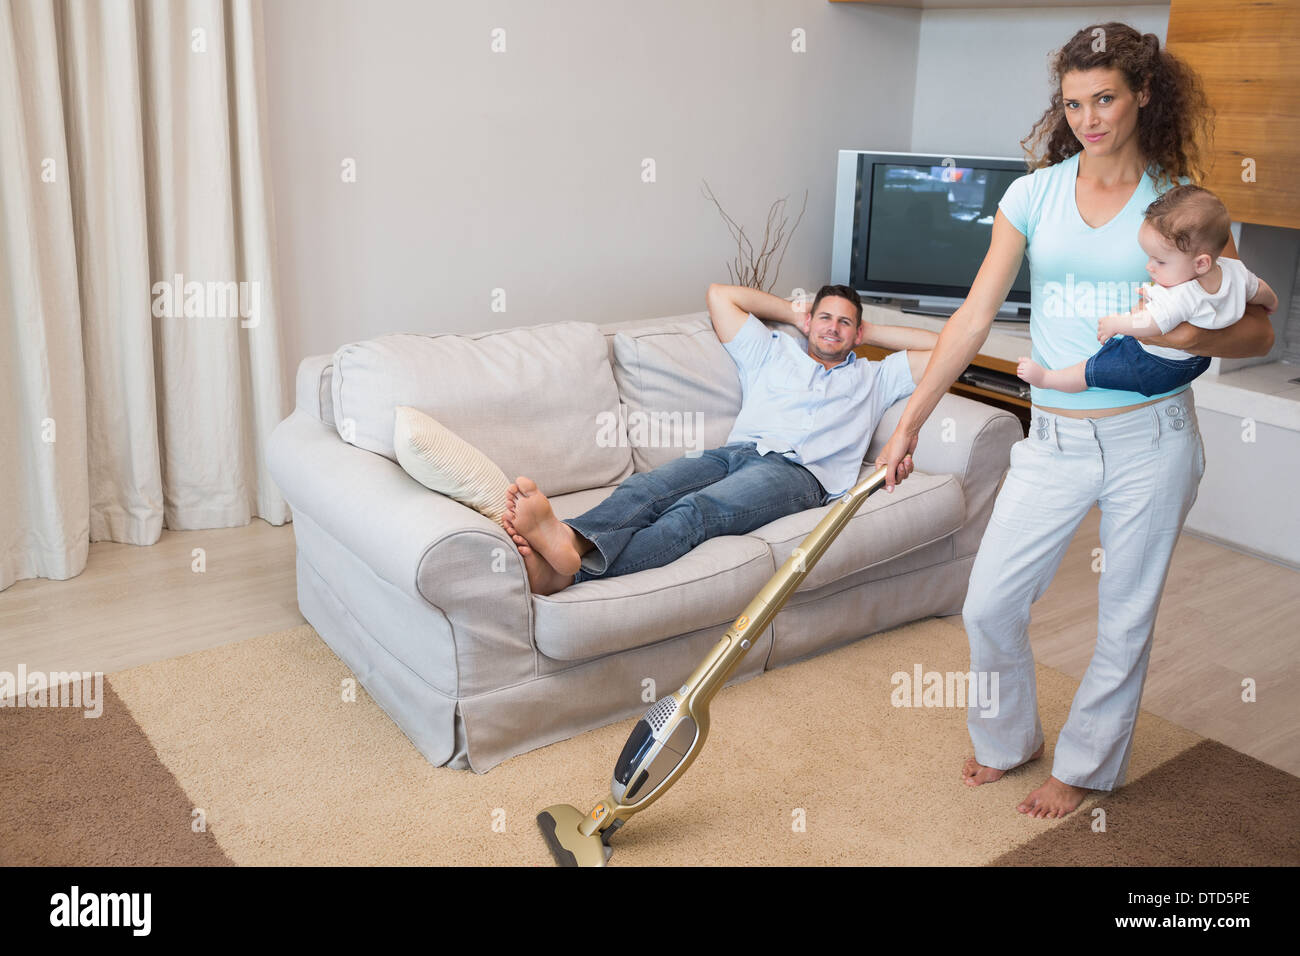 Woman cleaning house while carrying baby Stock Photo